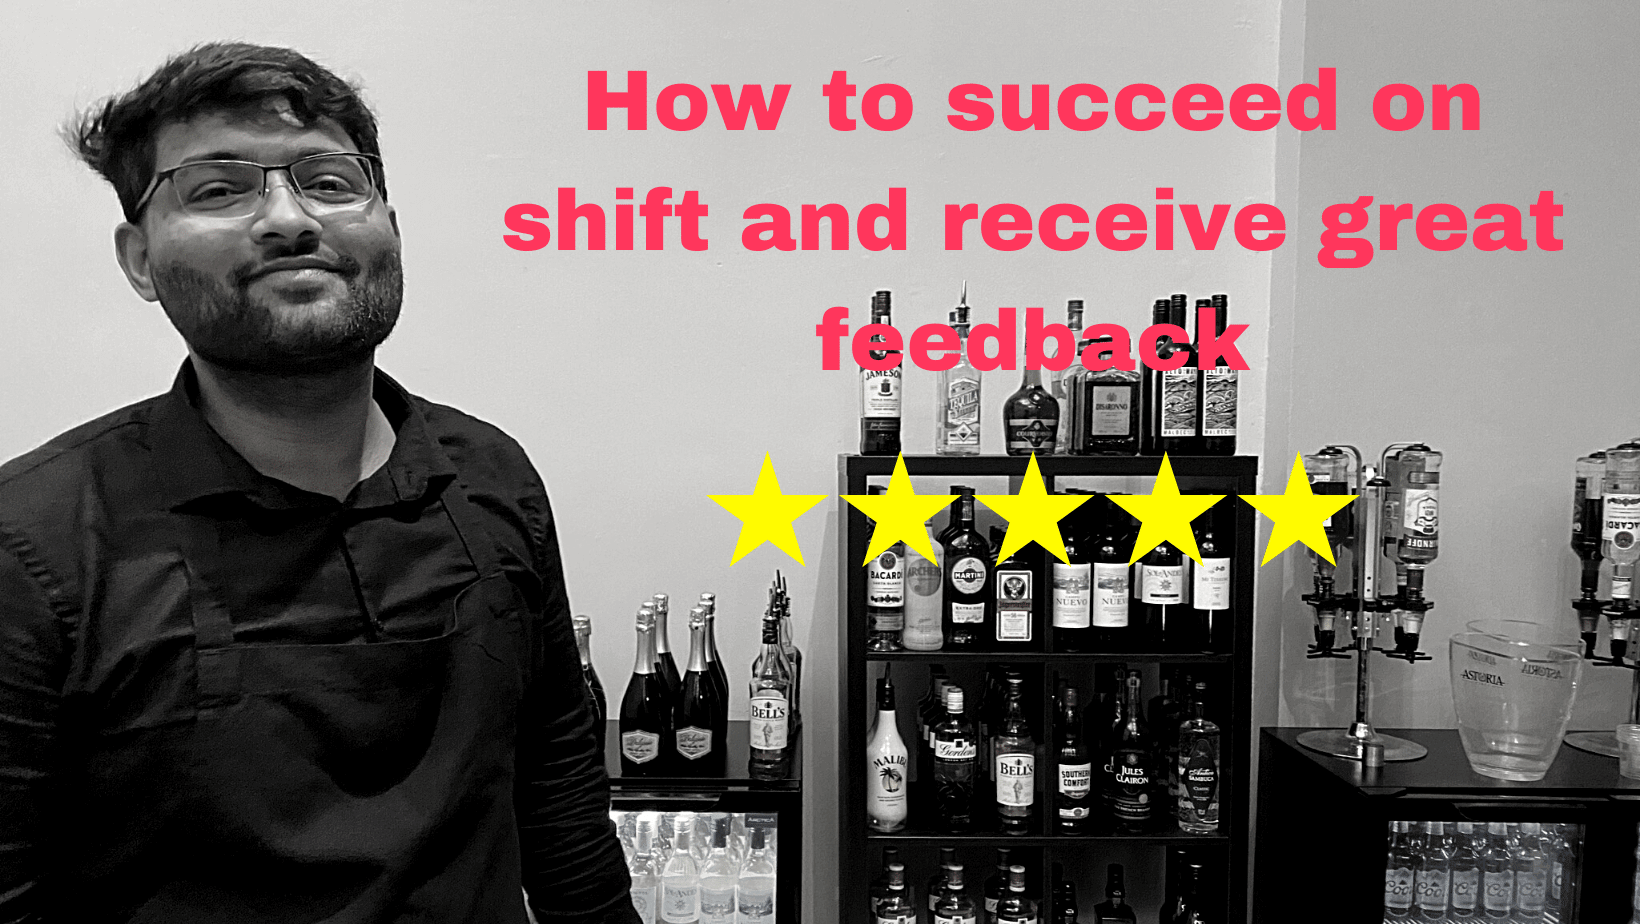 thumbnail for the blog post - How to Succeed on Shift and Receive Great Feedback